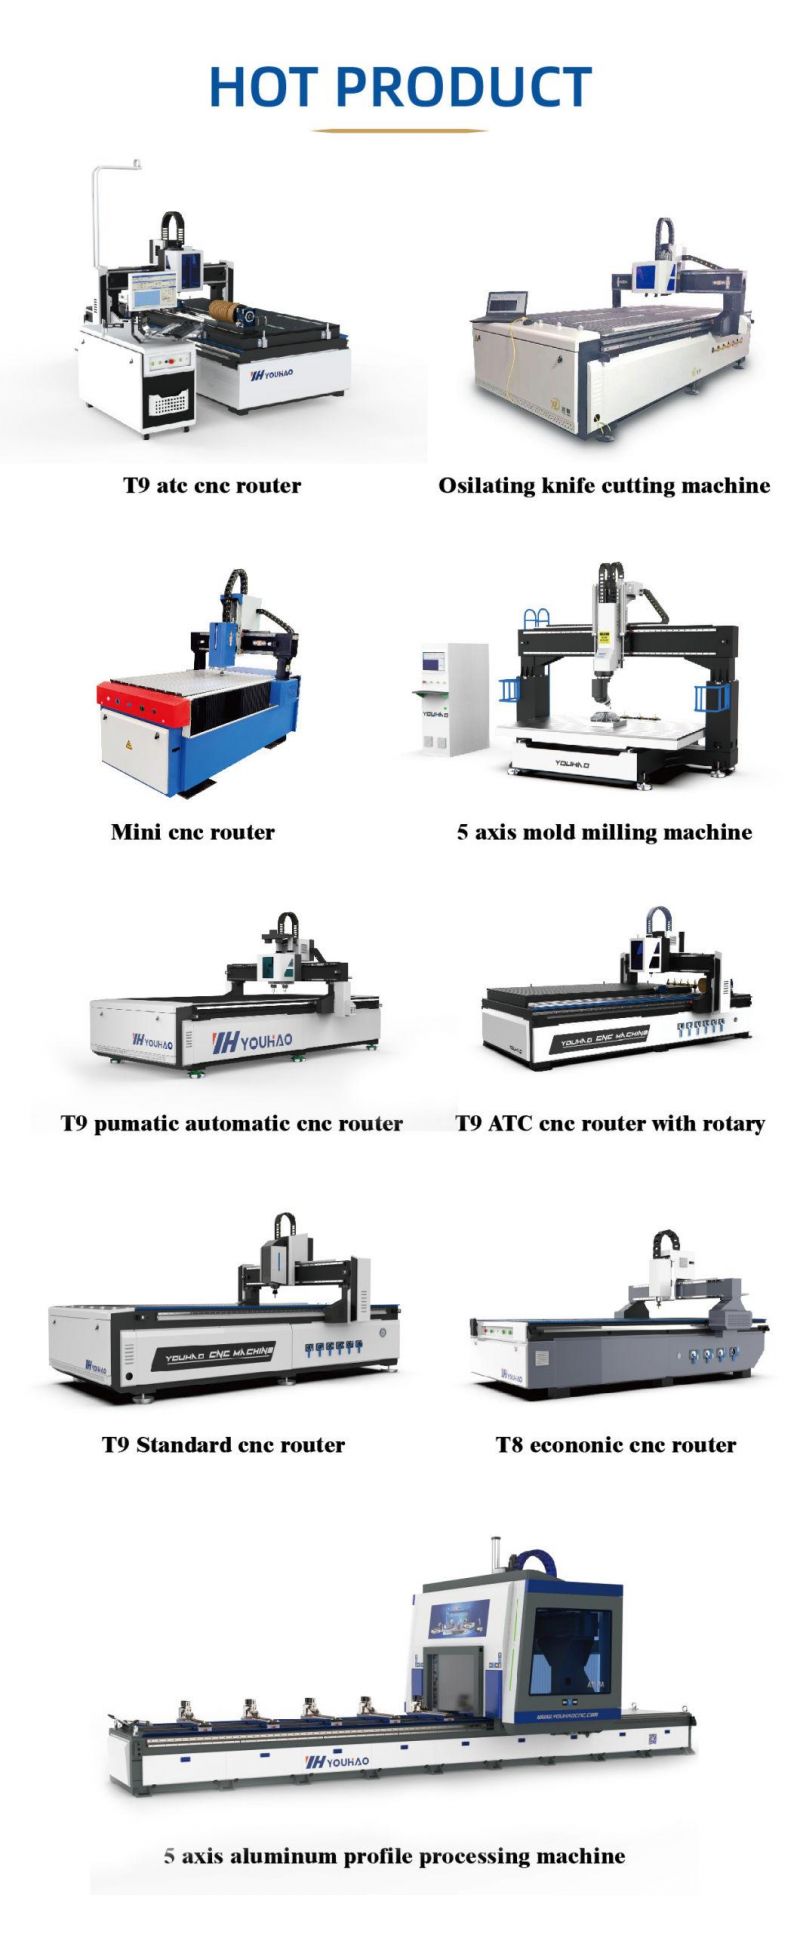 30% Discount CNC Engraving 4axis 8 Spindles Rotary 8head Spindle Cylinder Engraving Woodworking CNC Router